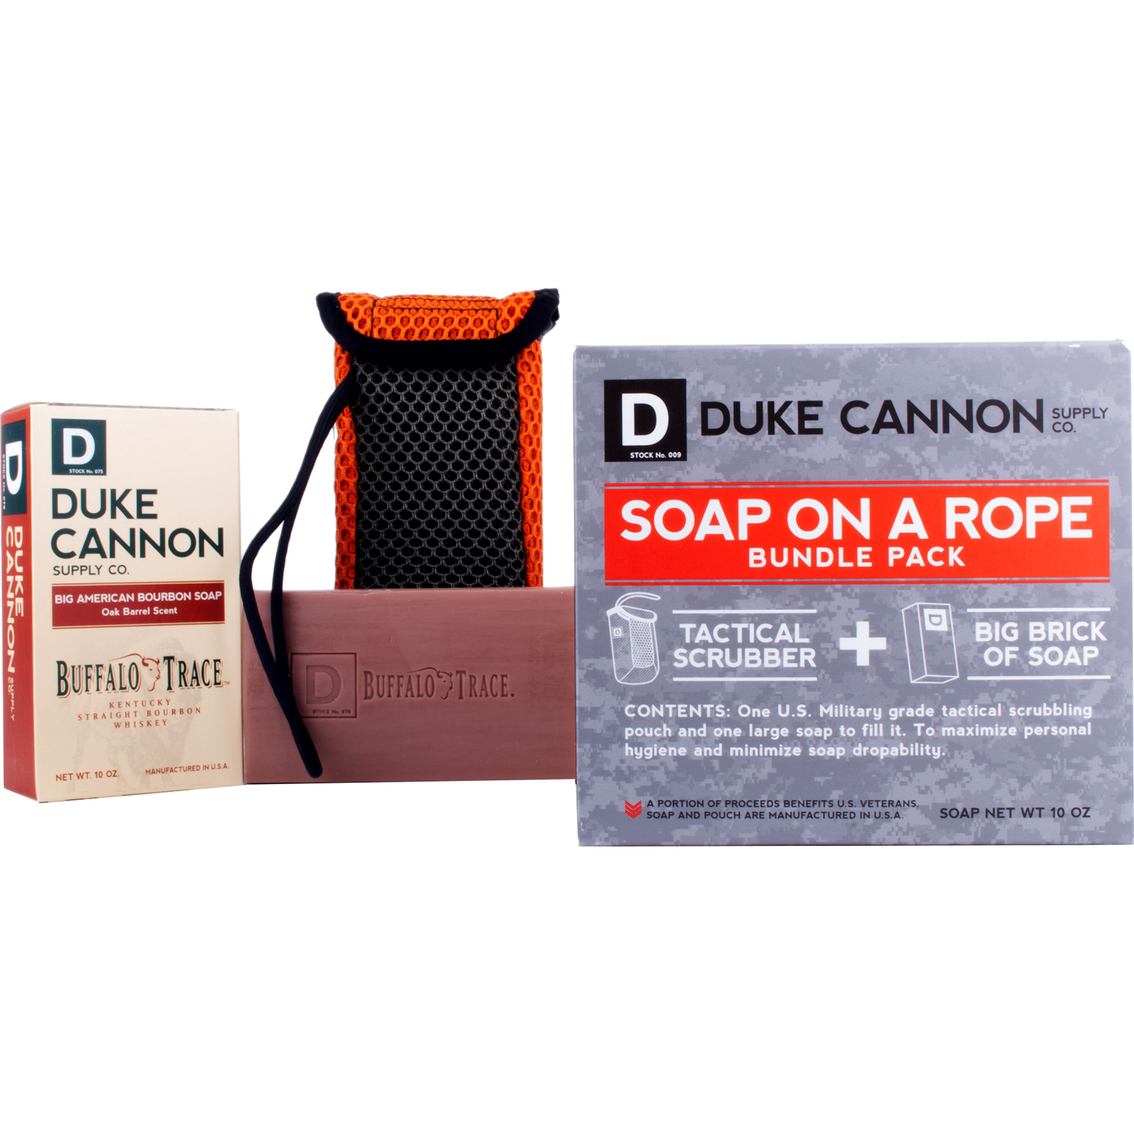 Duke Cannon Bourbon Soap on a Rope Bundle Pack - Image 2 of 2